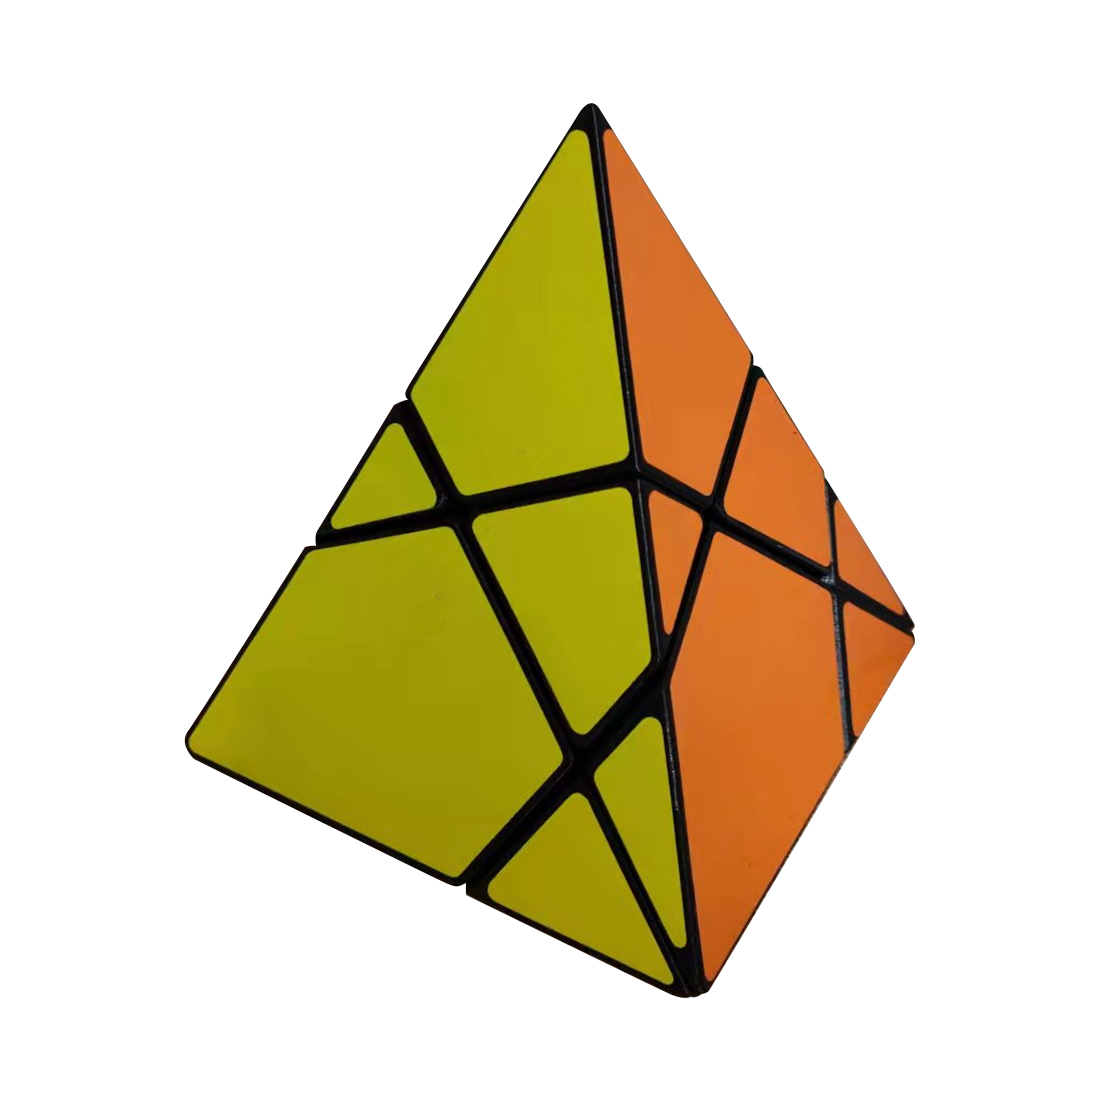 3x3 Pentahedron Pyramid Tower Cube（Fisher Based）